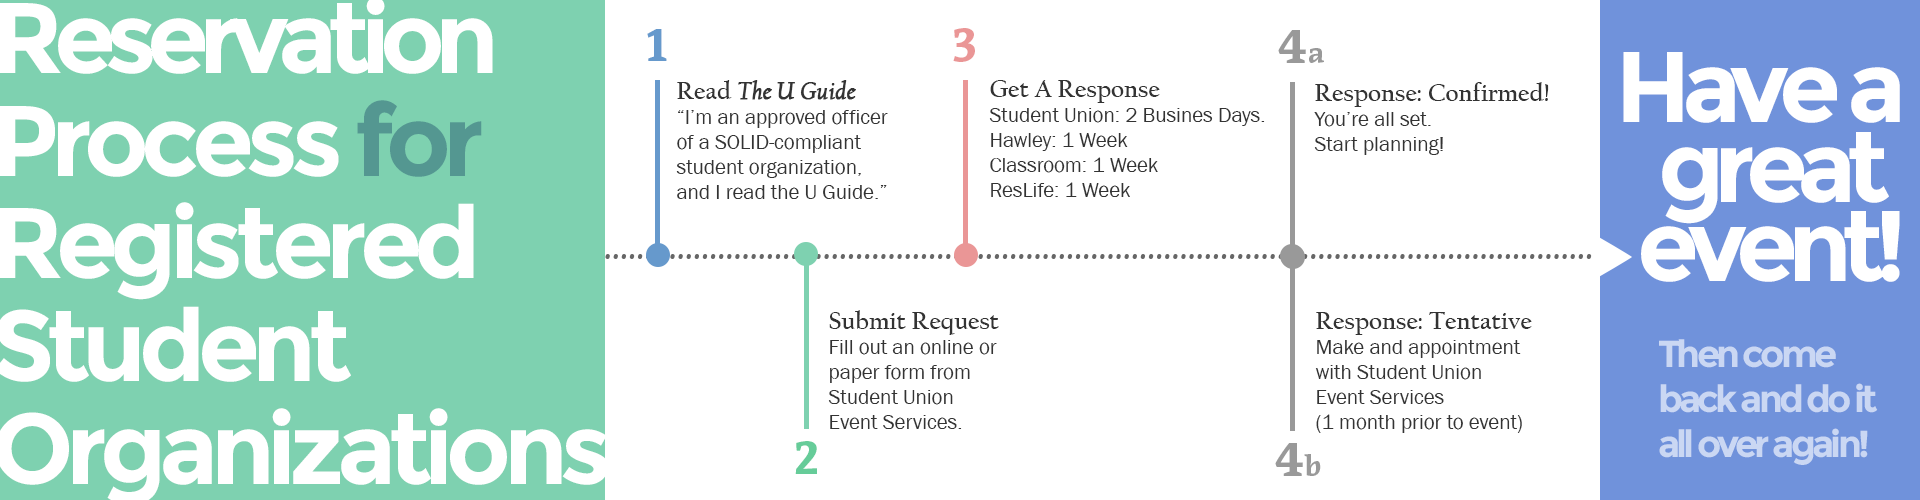  Reservation Process Graphic: Read the U Guide, Submit Request, Get Response, Have Your Event